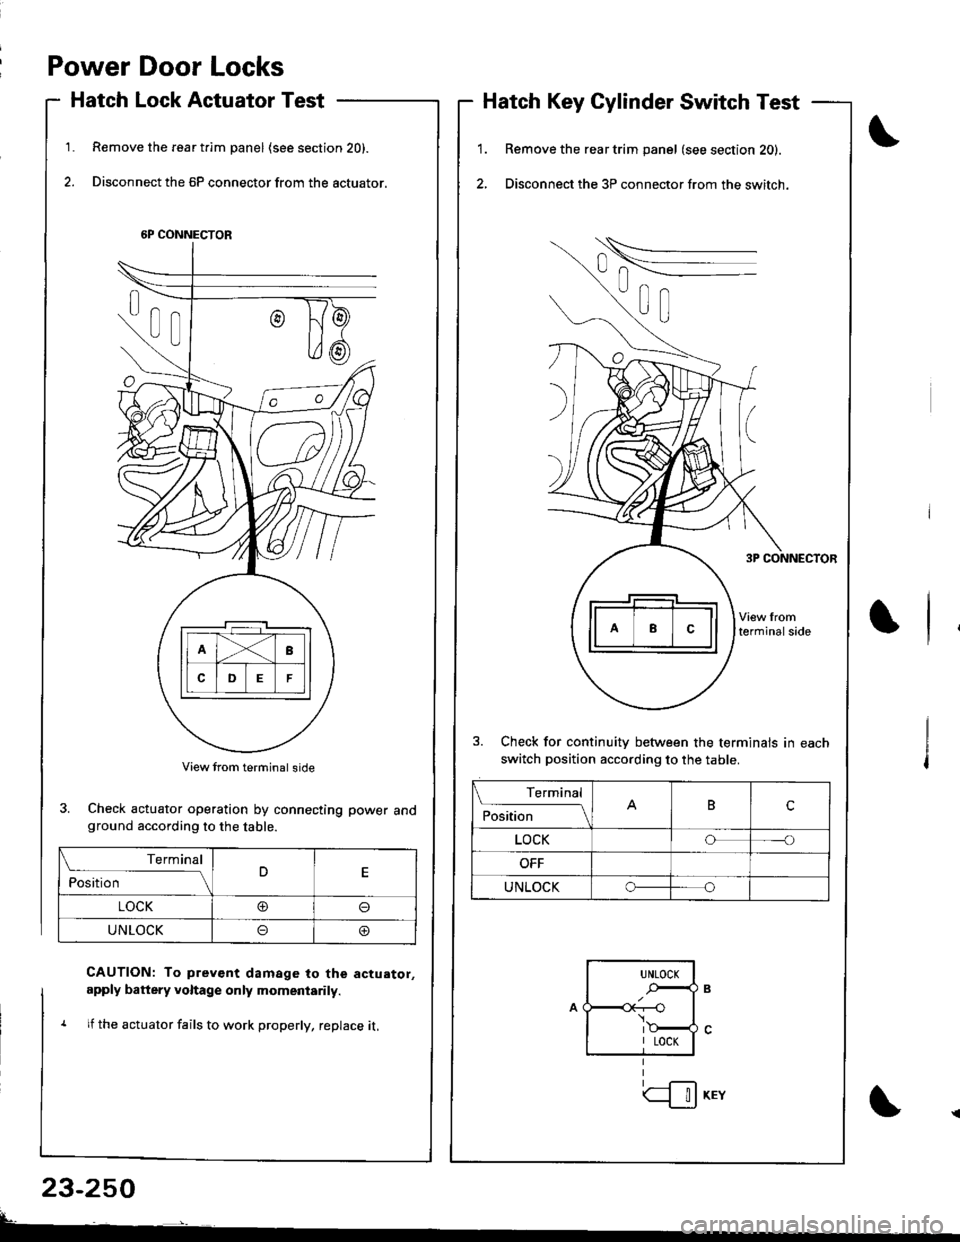 ACURA INTEGRA 1998  Service Repair Manual Power Door Locks
Hatch Lock Actuator Test
Remove the rear t.im panel (see section 20).
Disconnect the 6P connector from the actuator.
1.1.
2.
Hatch Key Cylinder Switch Test
Remove the rear trim panel 